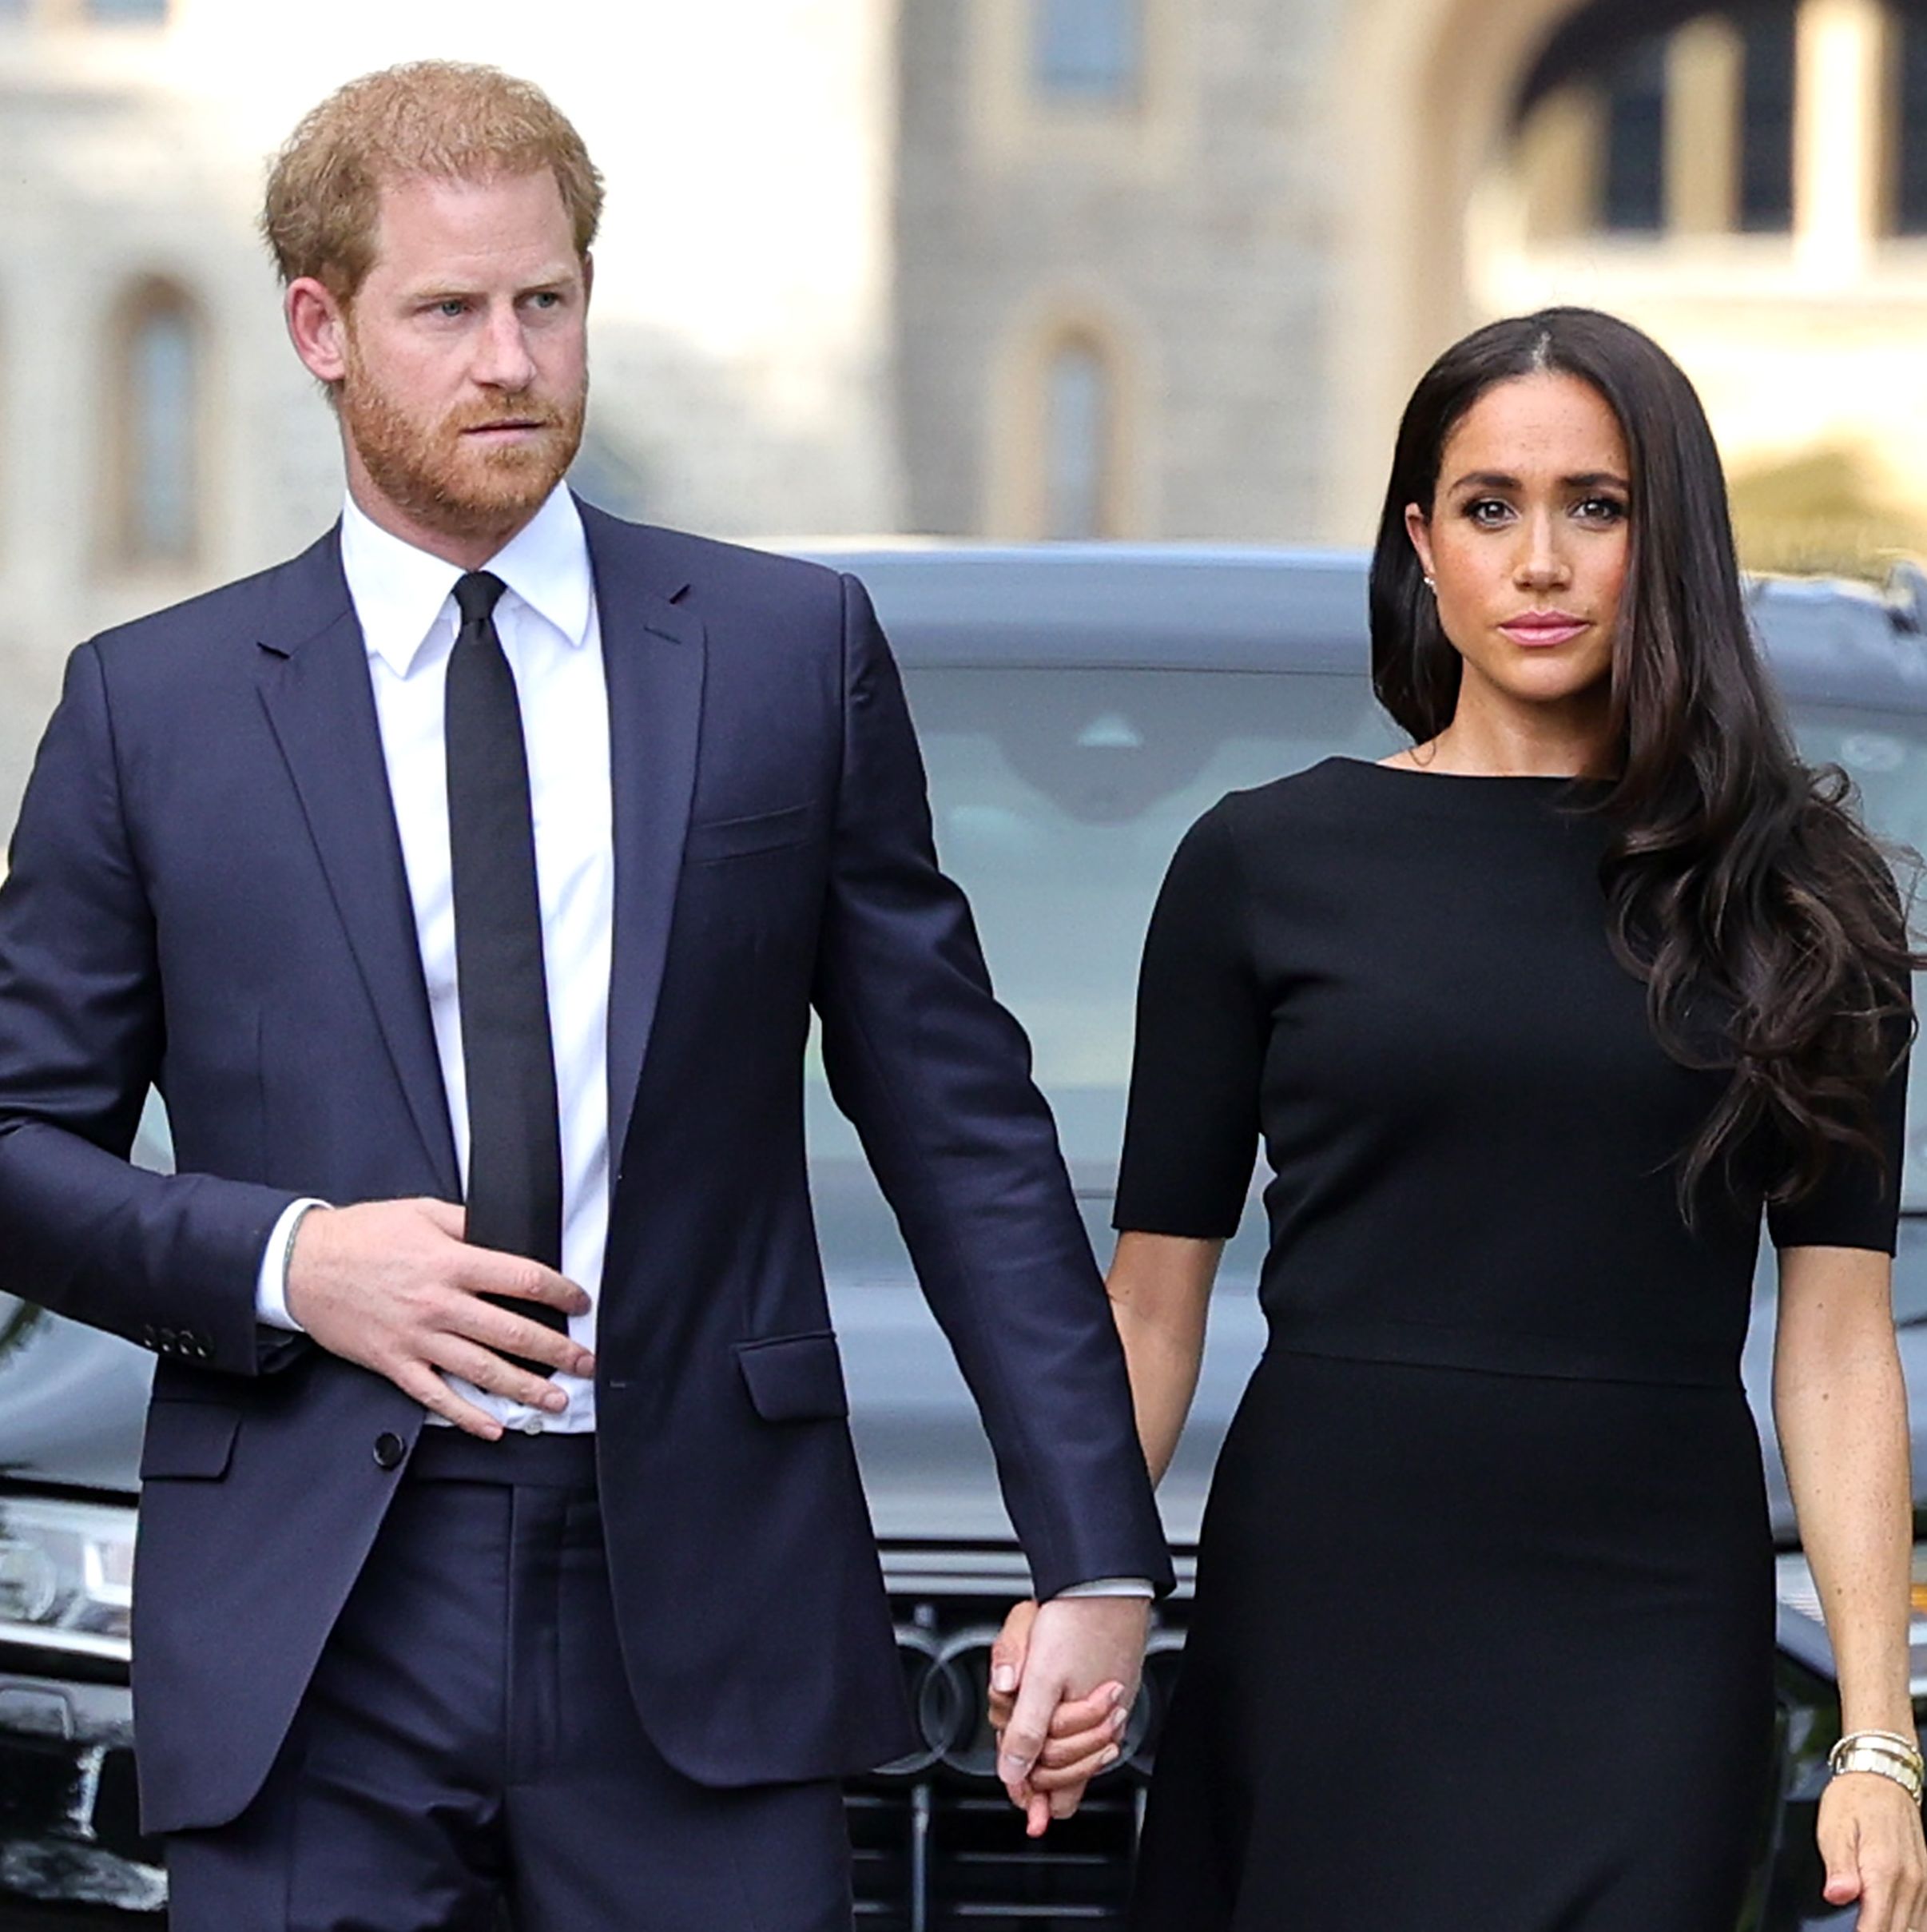 Archie's birthday played a role in Meghan's decision to stay in California. But there's more to the story, a close friend tells People.